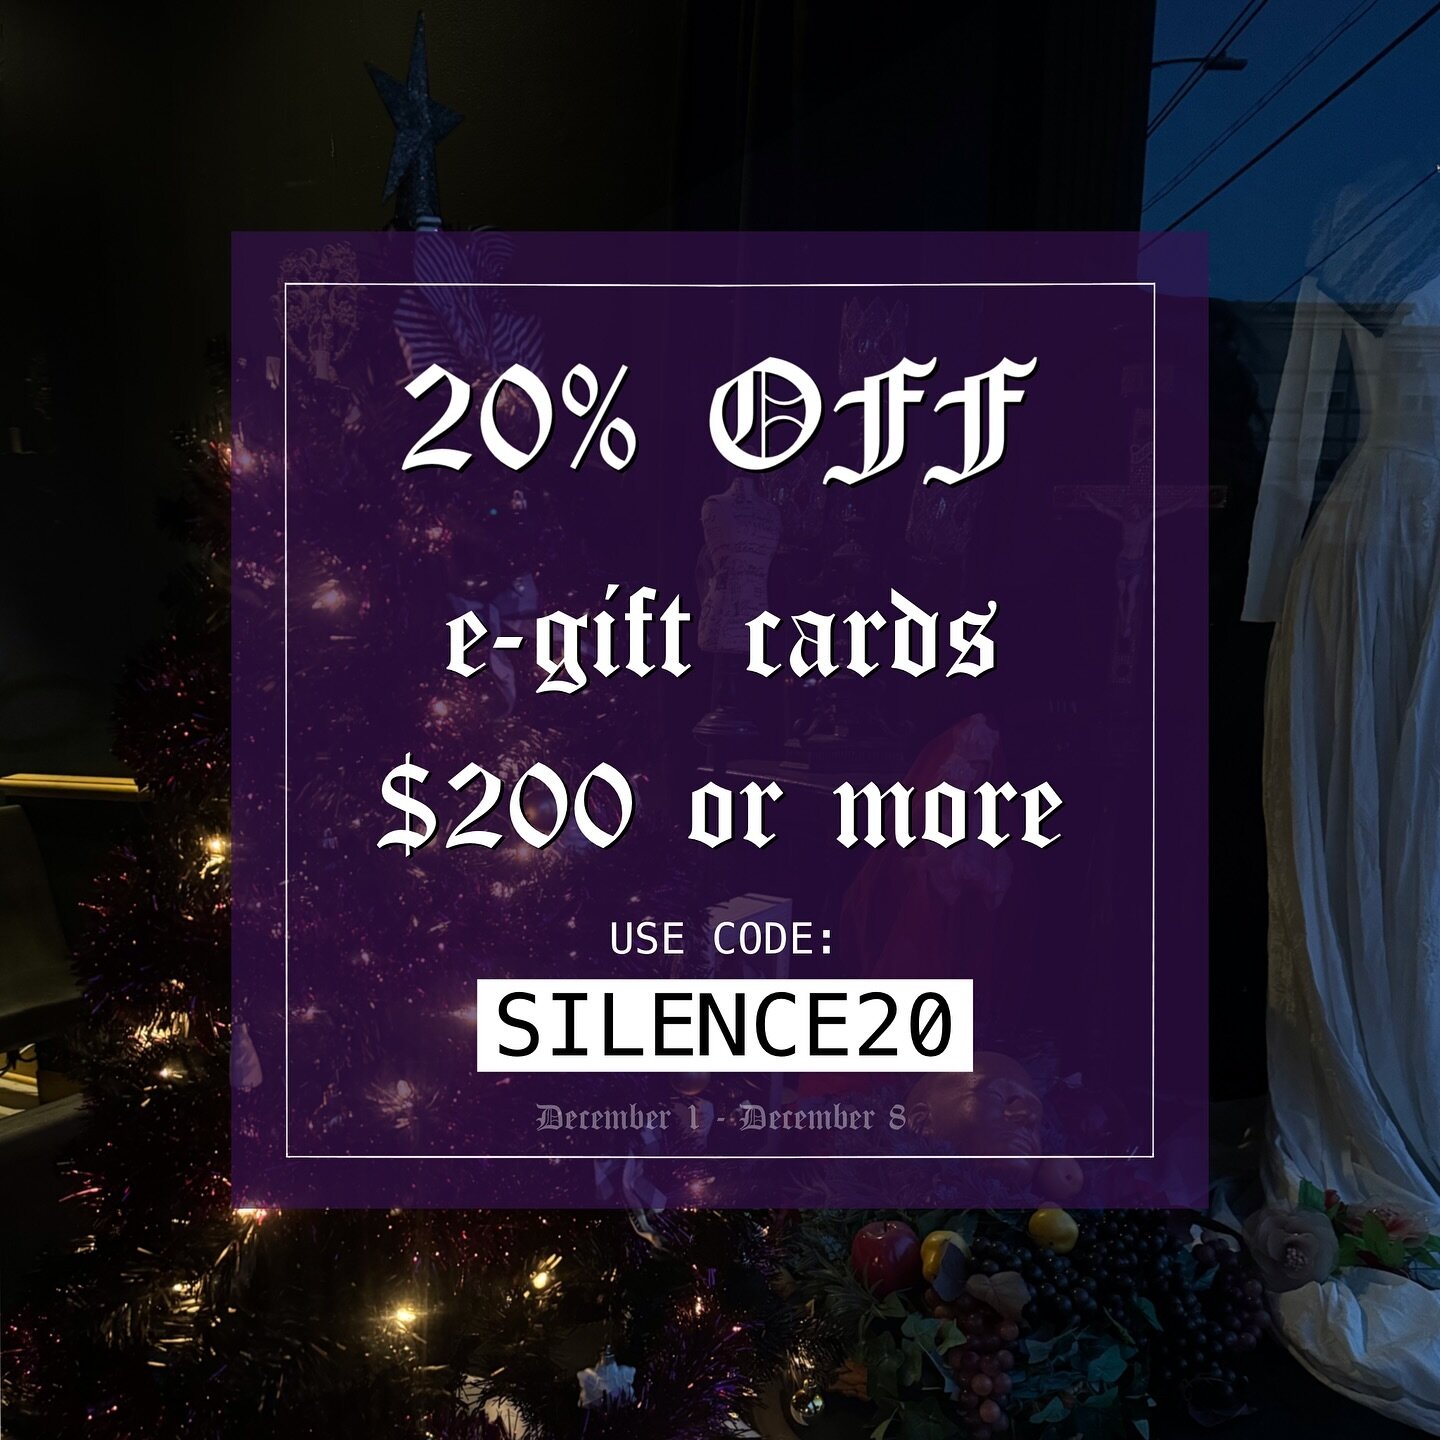 Tattoos are the best gift 🎁✨ Now until December 8th, we are discounting e-gift cards 20% when you spend $200 or more! Use code &ldquo;SILENCE20&rdquo; at check out. Maybe we will do another promo again soon&hellip;. 🤫
.
.
#cttattooshop #cttattooart